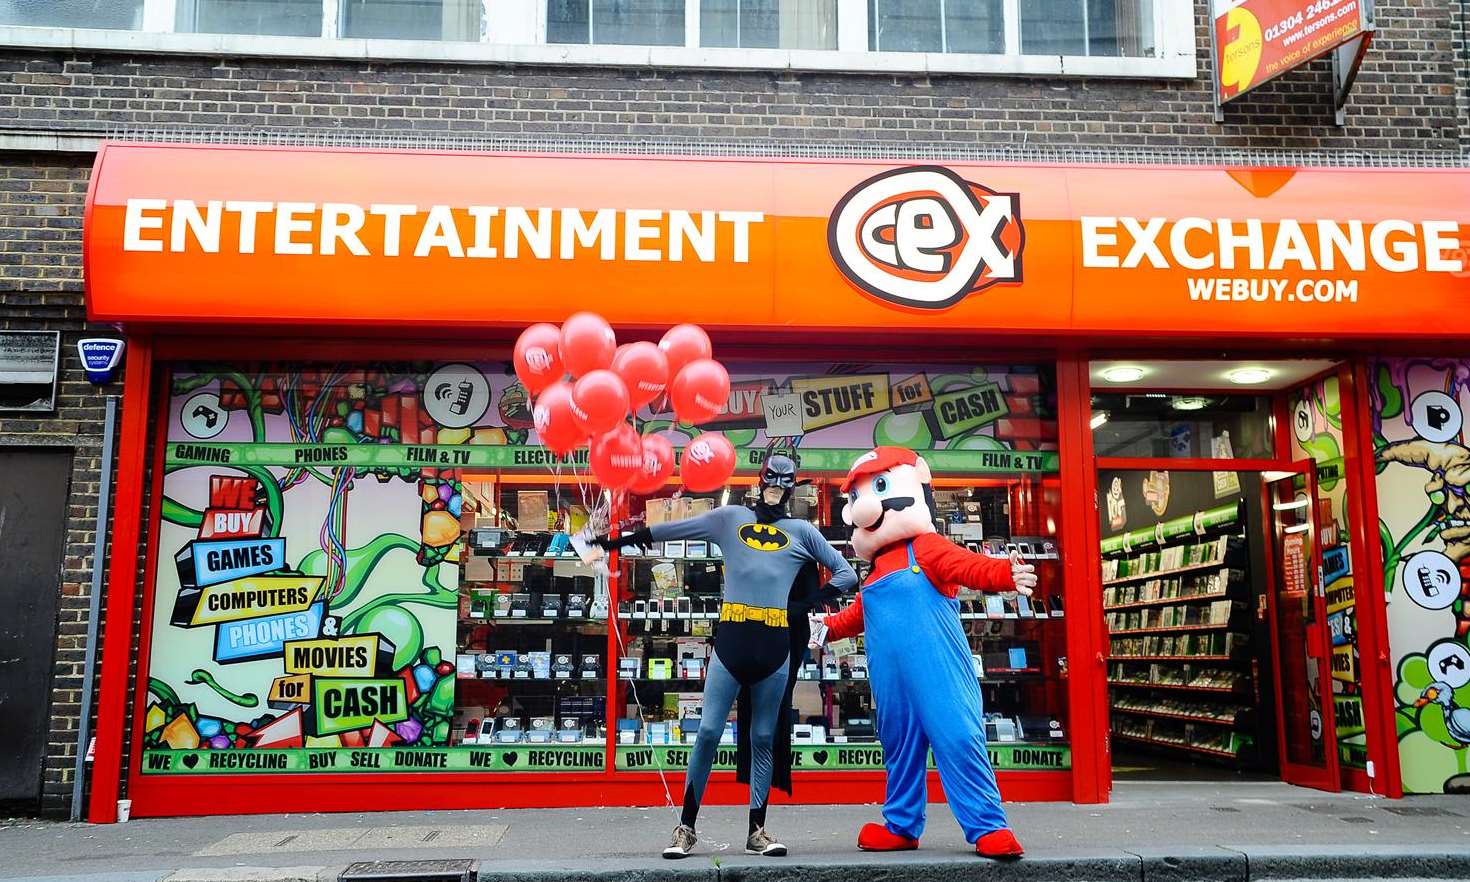 CEX opened up by entrepreneur, Jack Edwards.